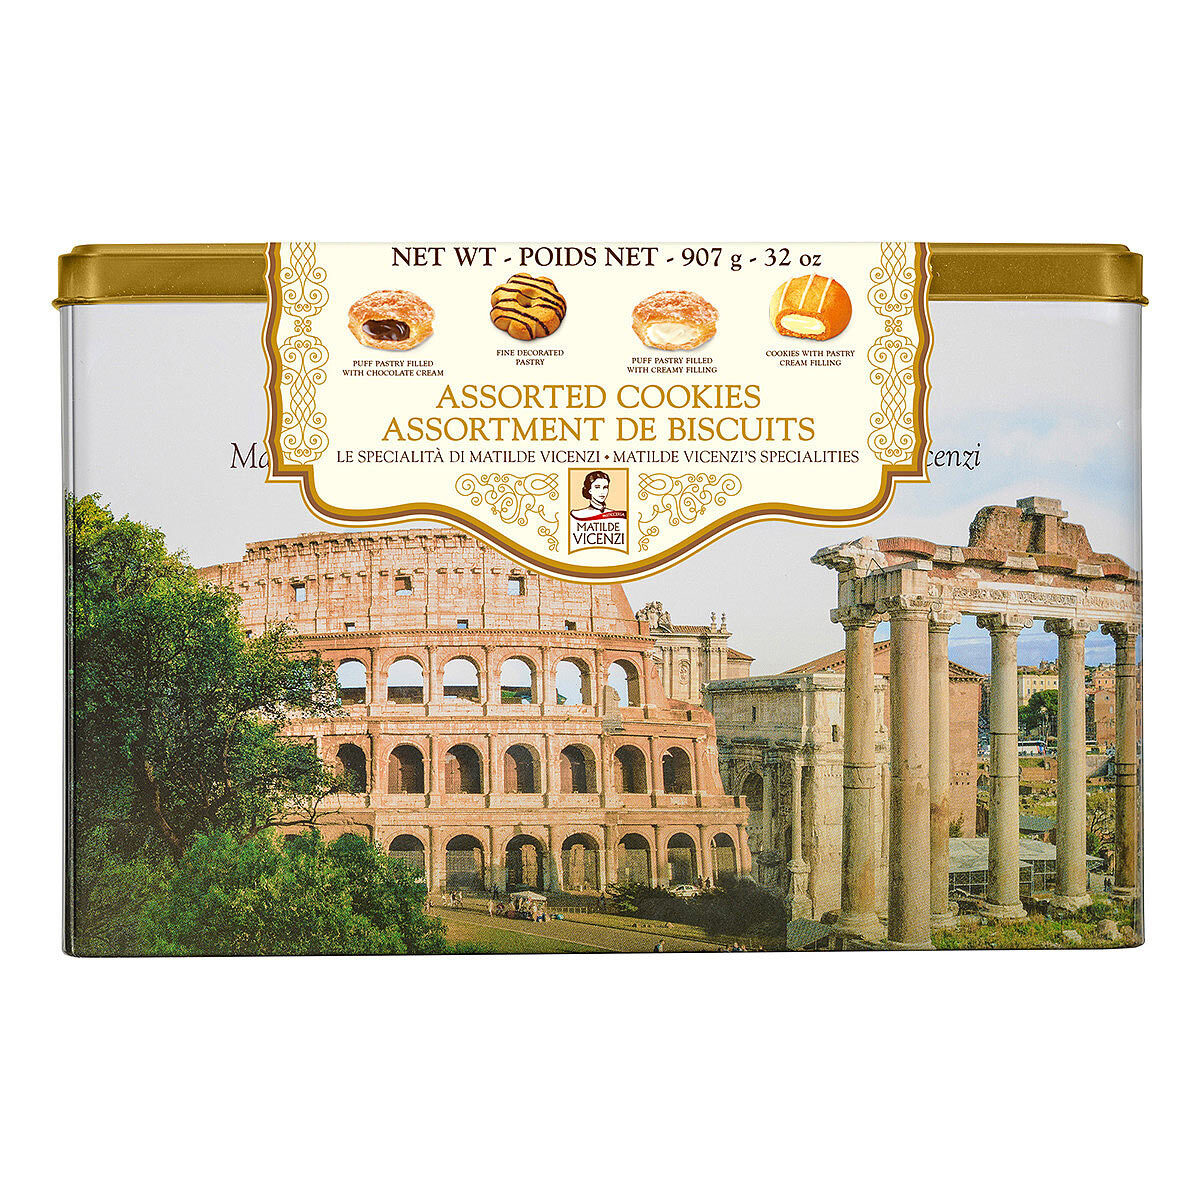 Front View of Box showing Colosseum